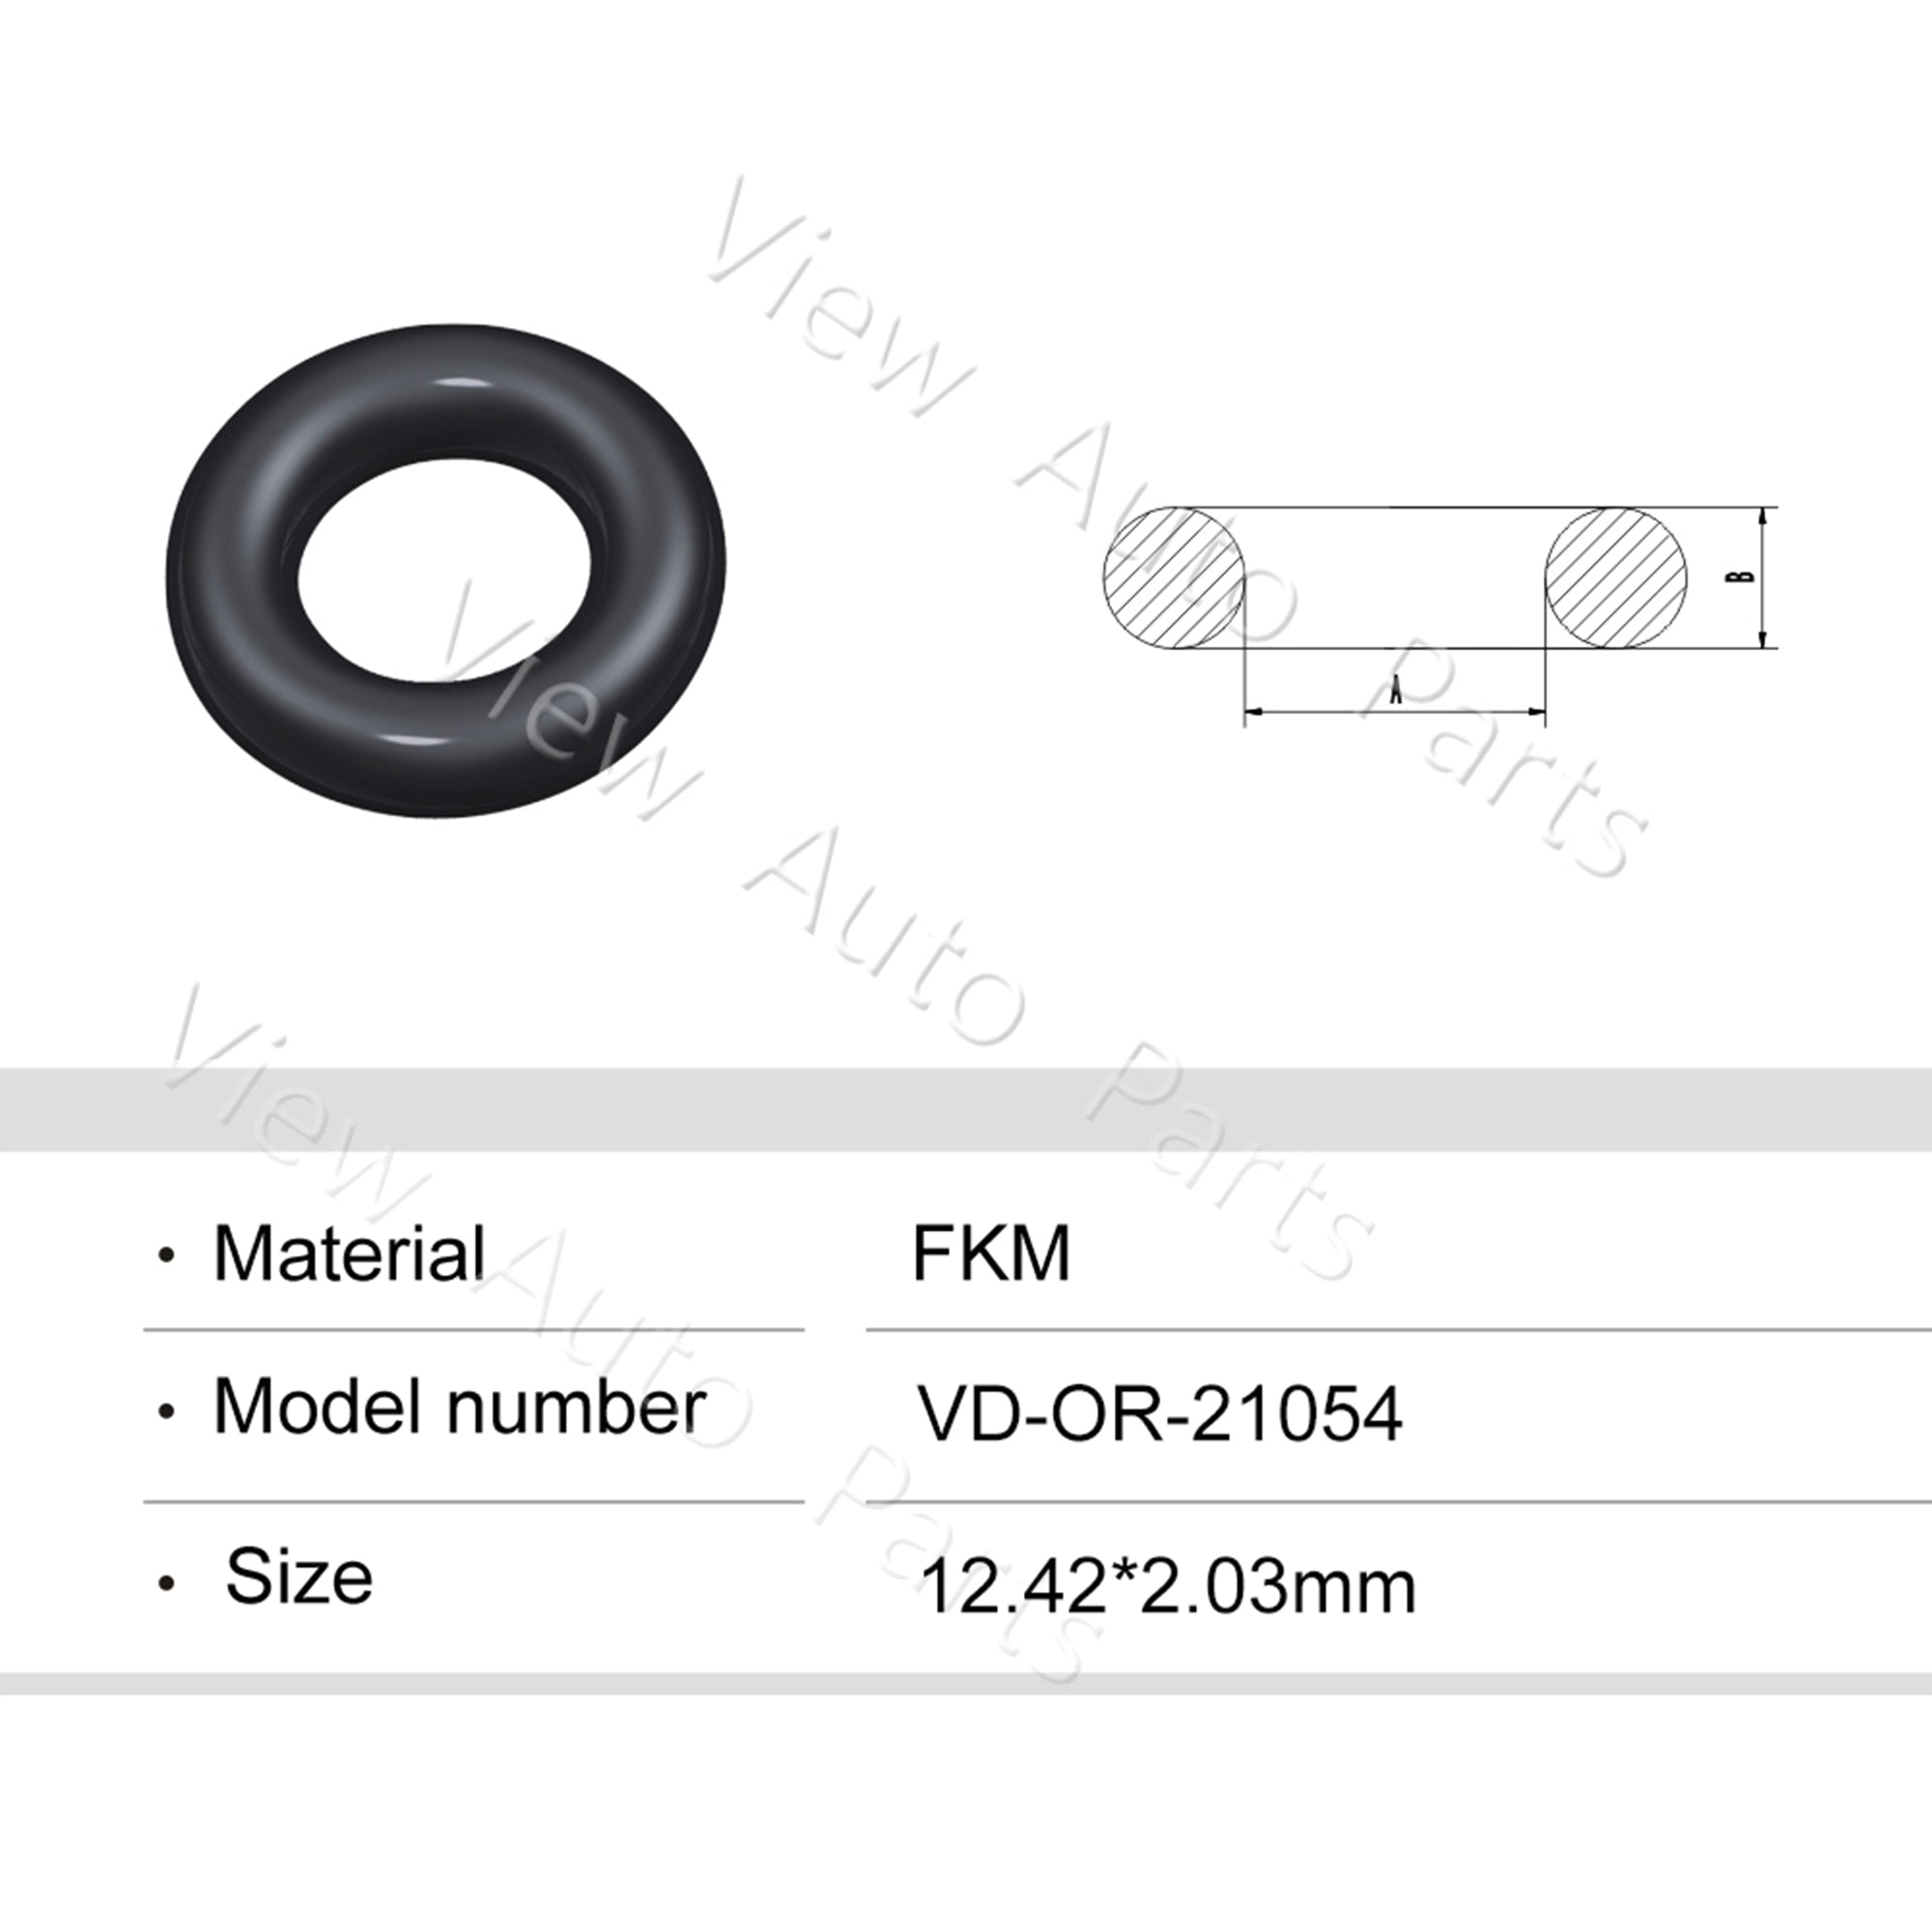 Fuel Injector Rubber Seal Orings for GM TBI Car Fuel Injector Repair Kits FKM & Rubber Heat Resistant, Size: 12.42*2.03mm OR-21054